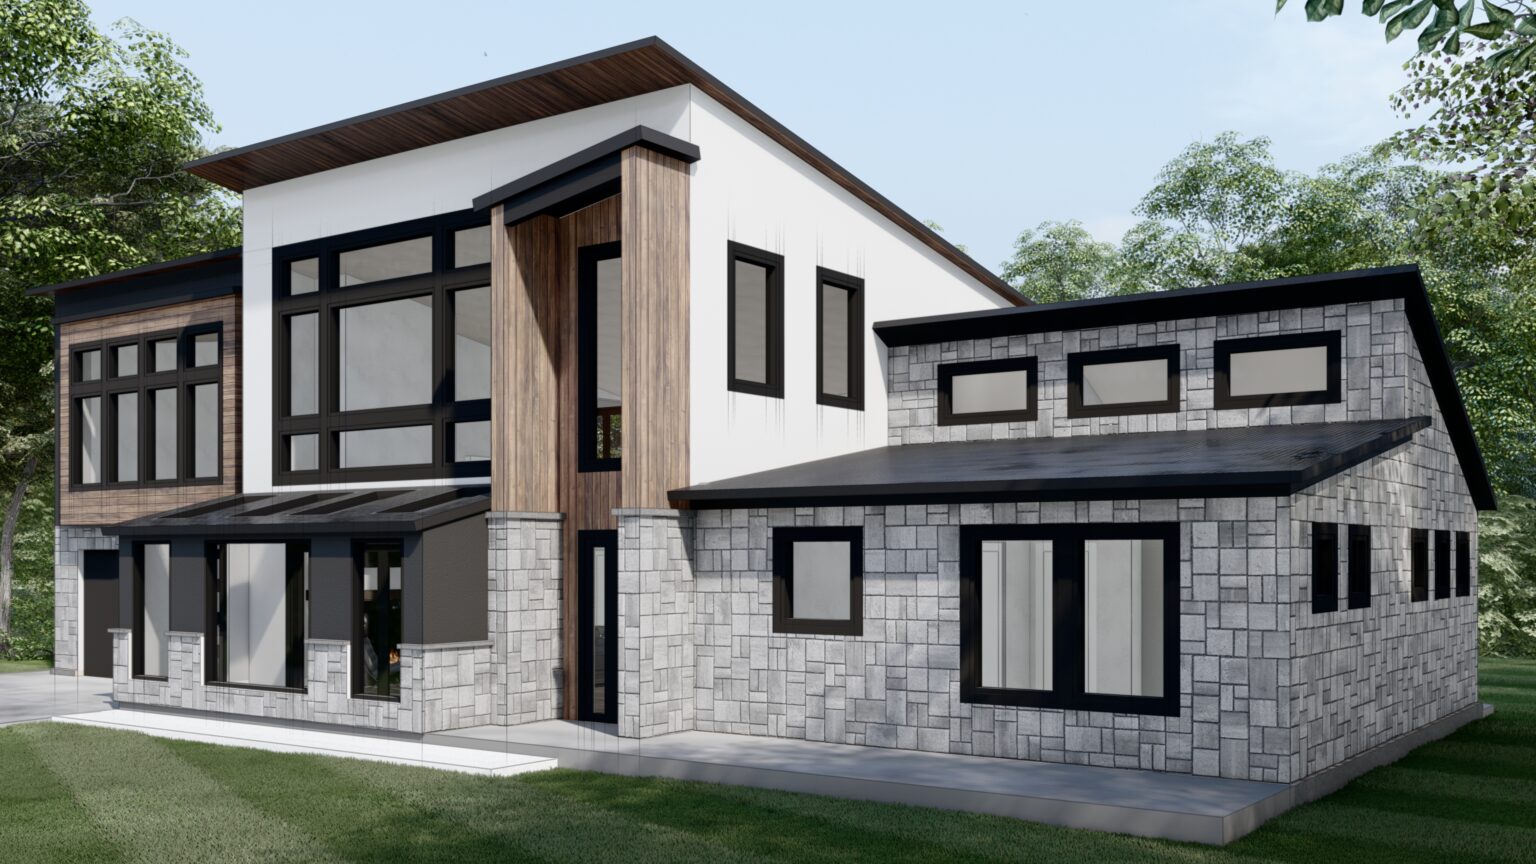 Rendering of a new custom home in Fort Collins, CO built by PR Builders.